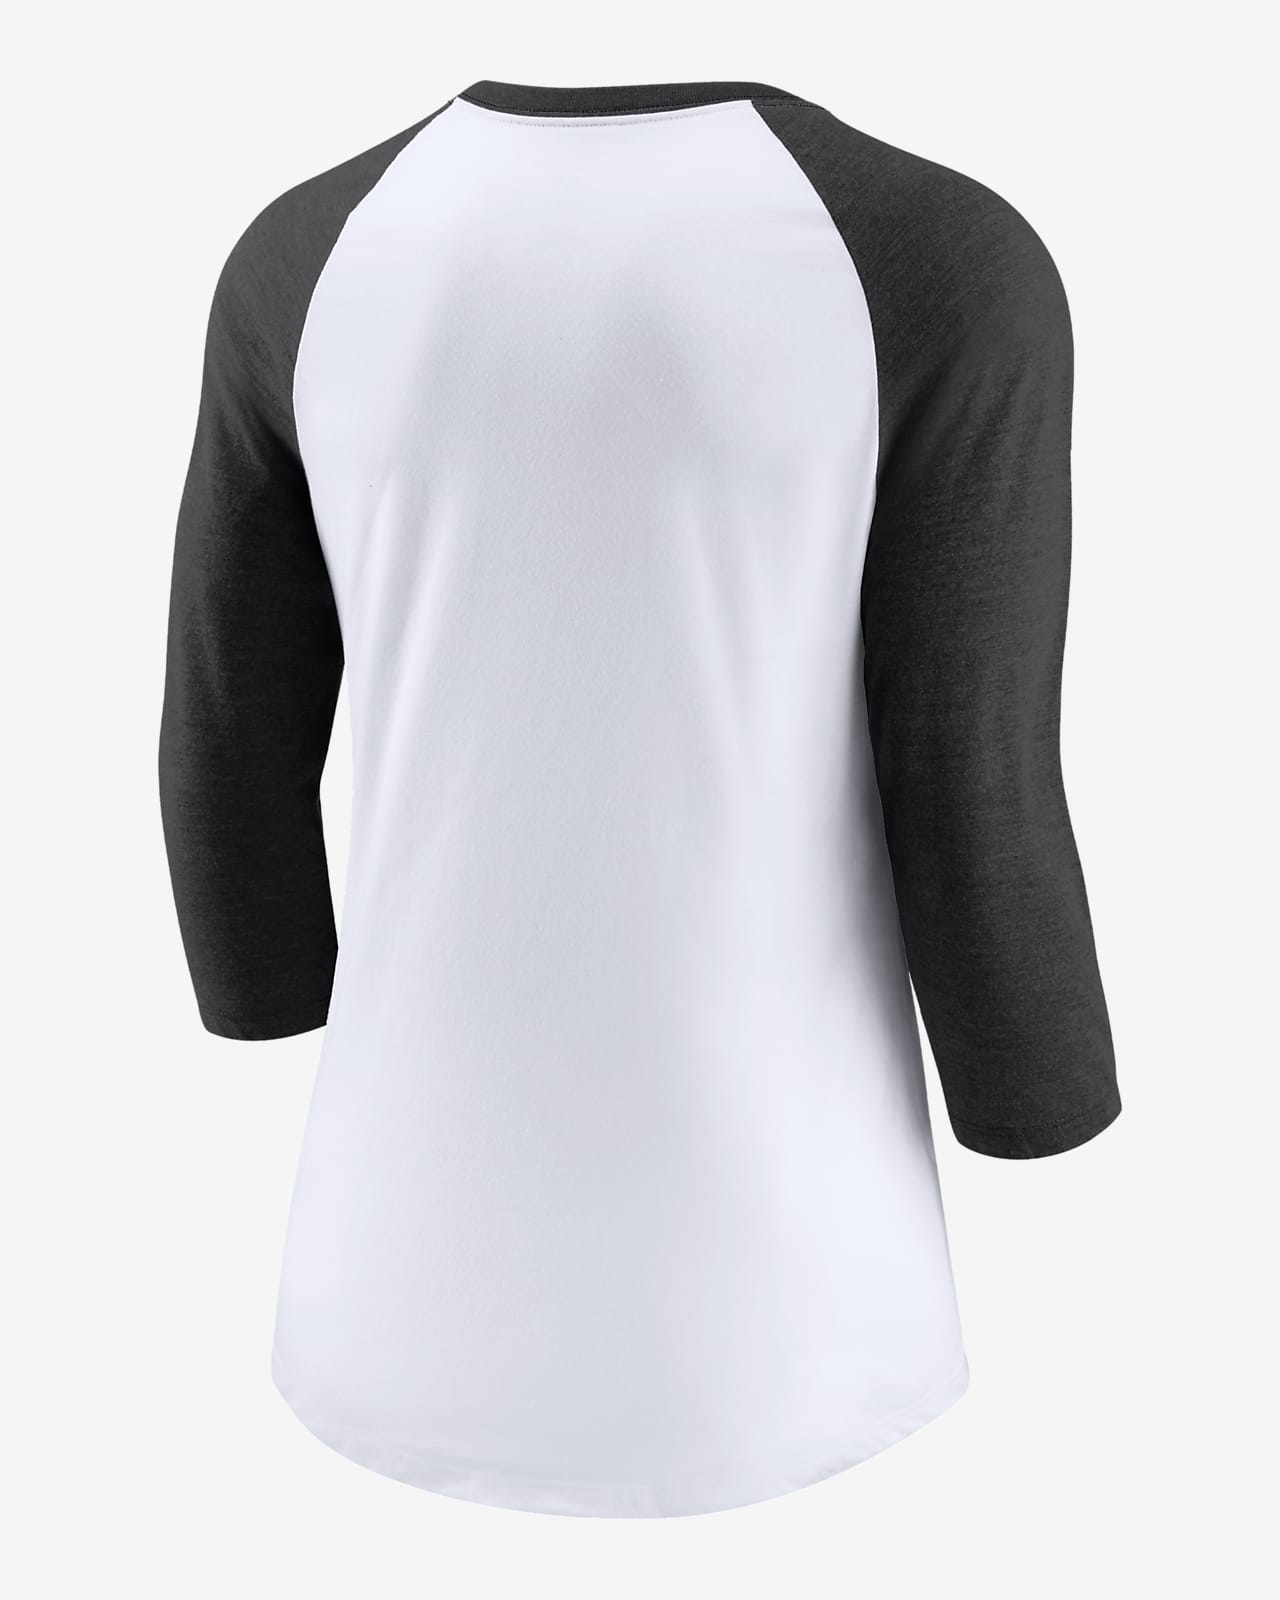 Nike Next Up (MLB Chicago White Sox) Women's 3/4-Sleeve Top.